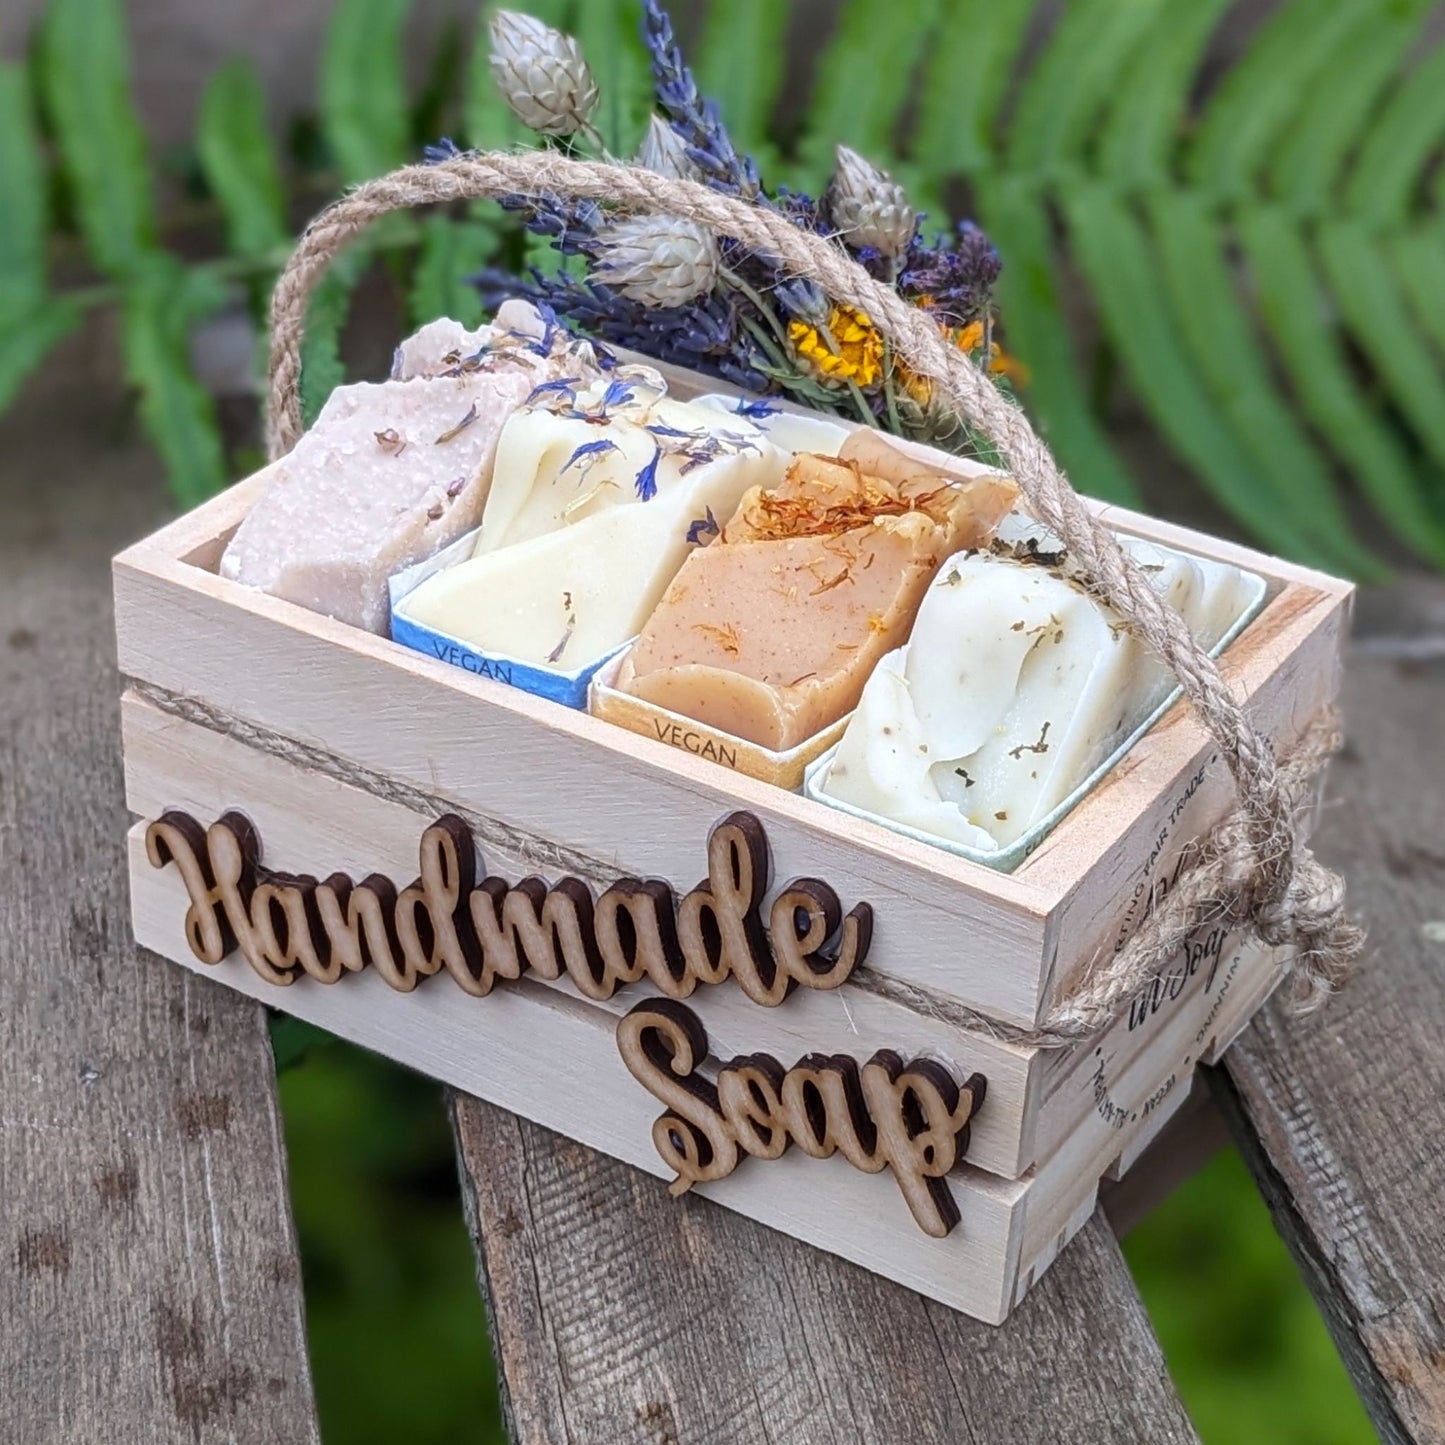 Wooden crate for handmade soaps